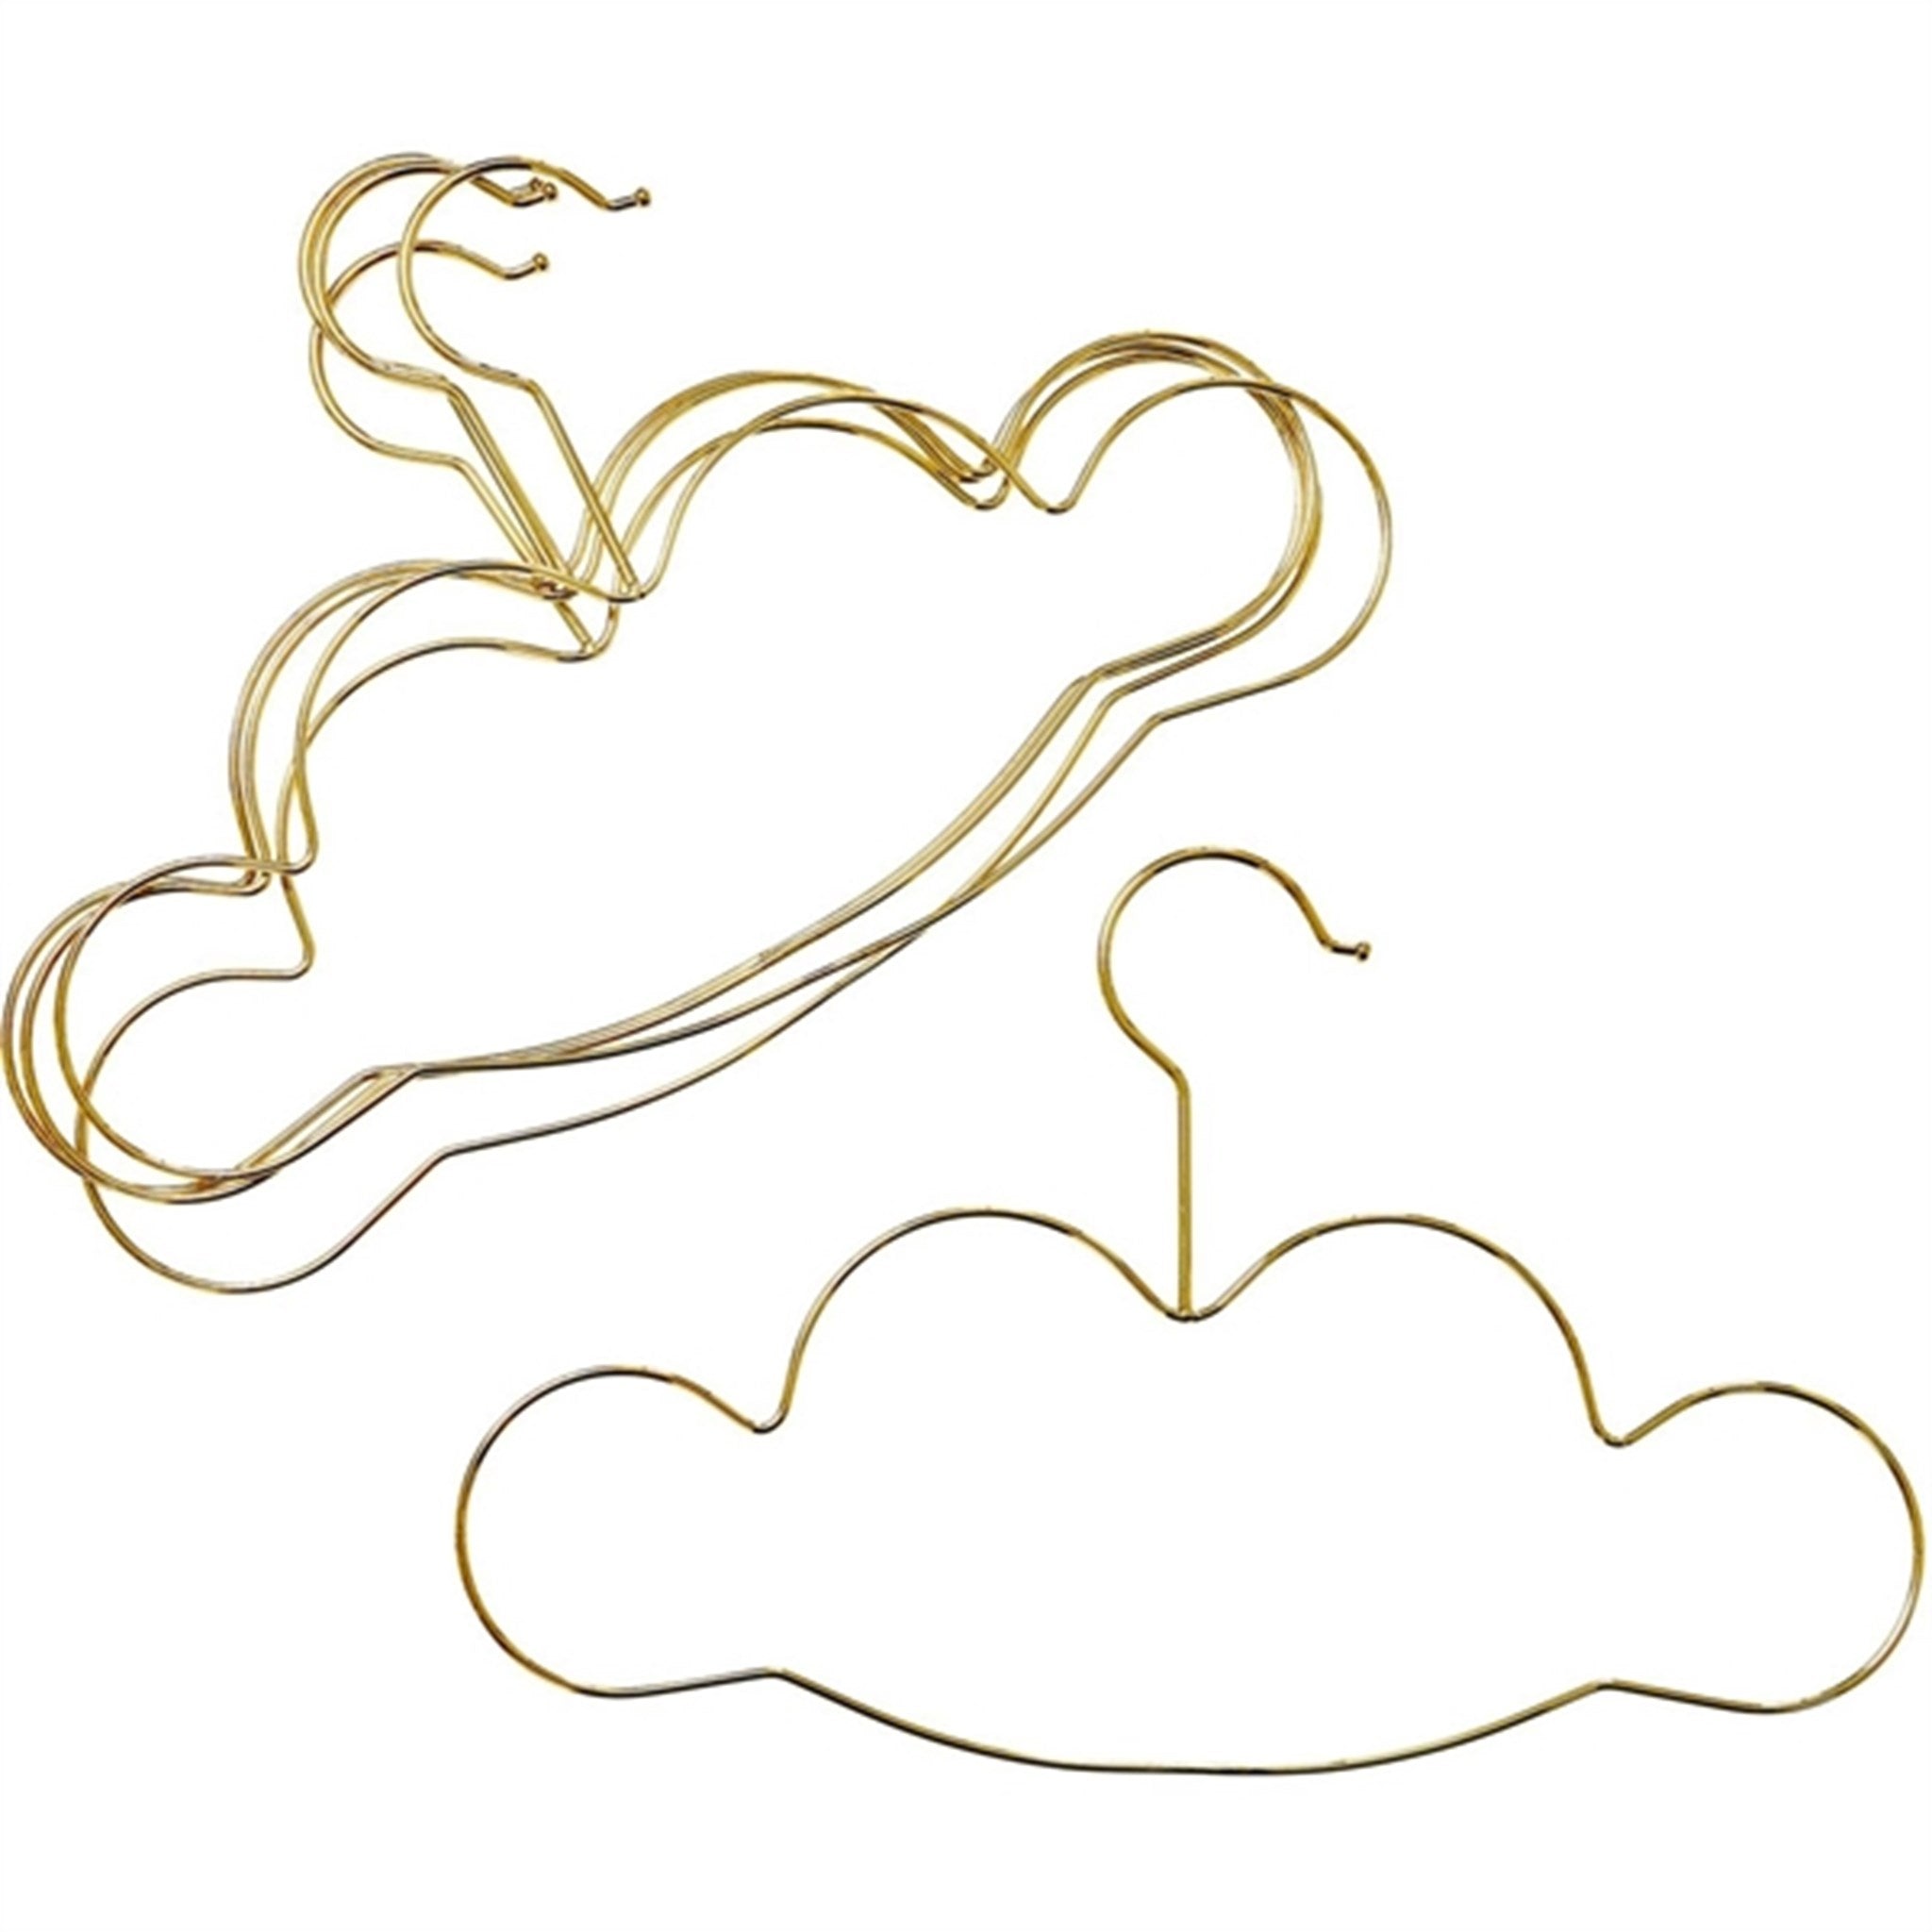 RICE Gold Small Cloud Shaped Metal Hangers 5-pack